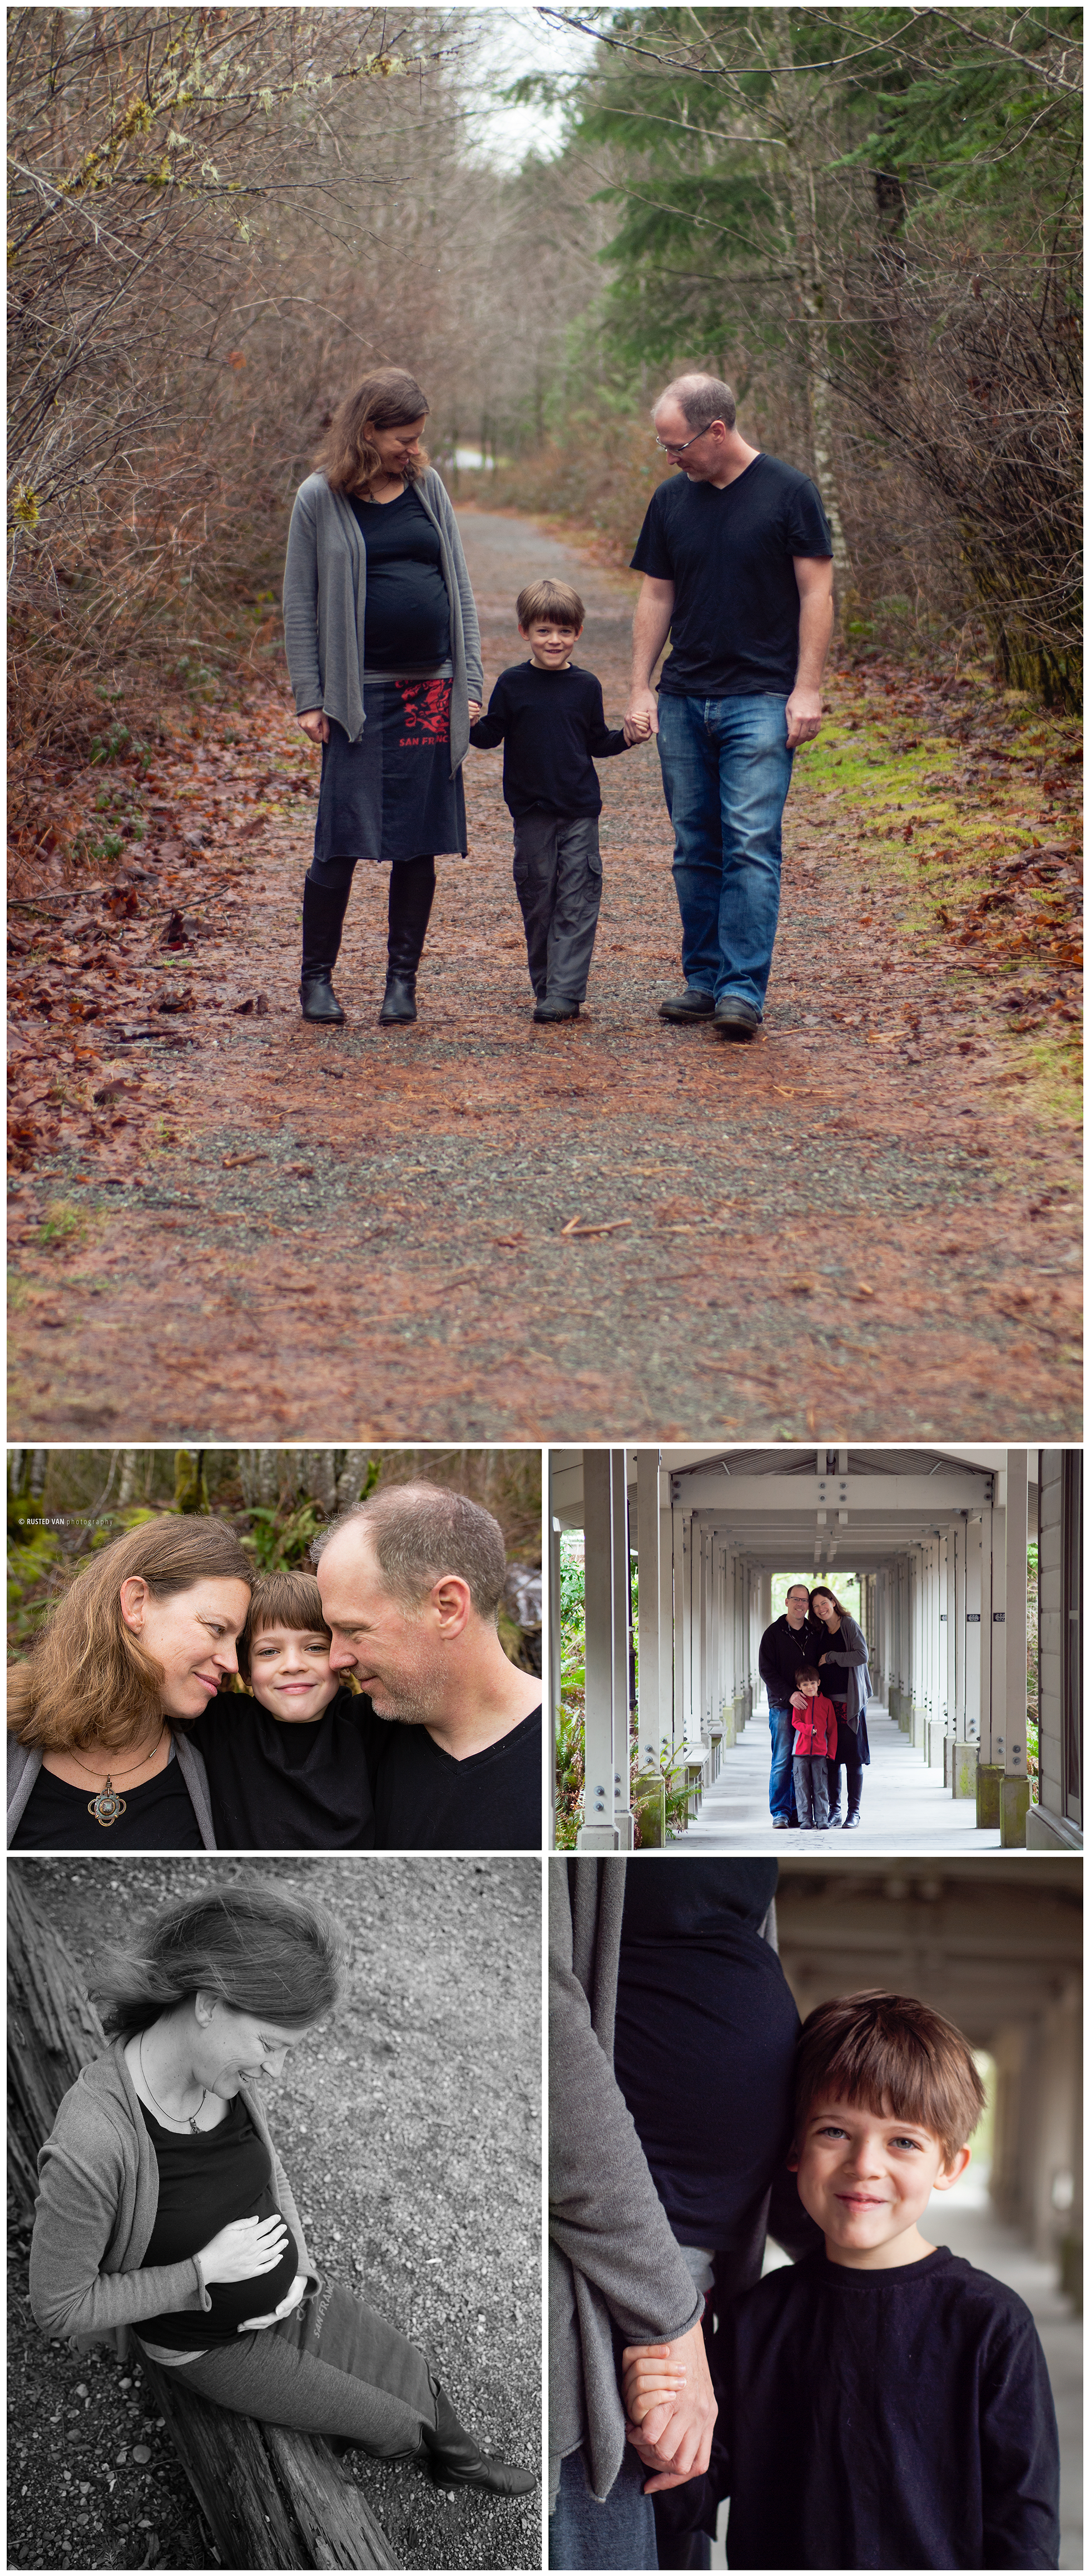 Borsting-Carpenter Family Session {by Rusted Van Photography}